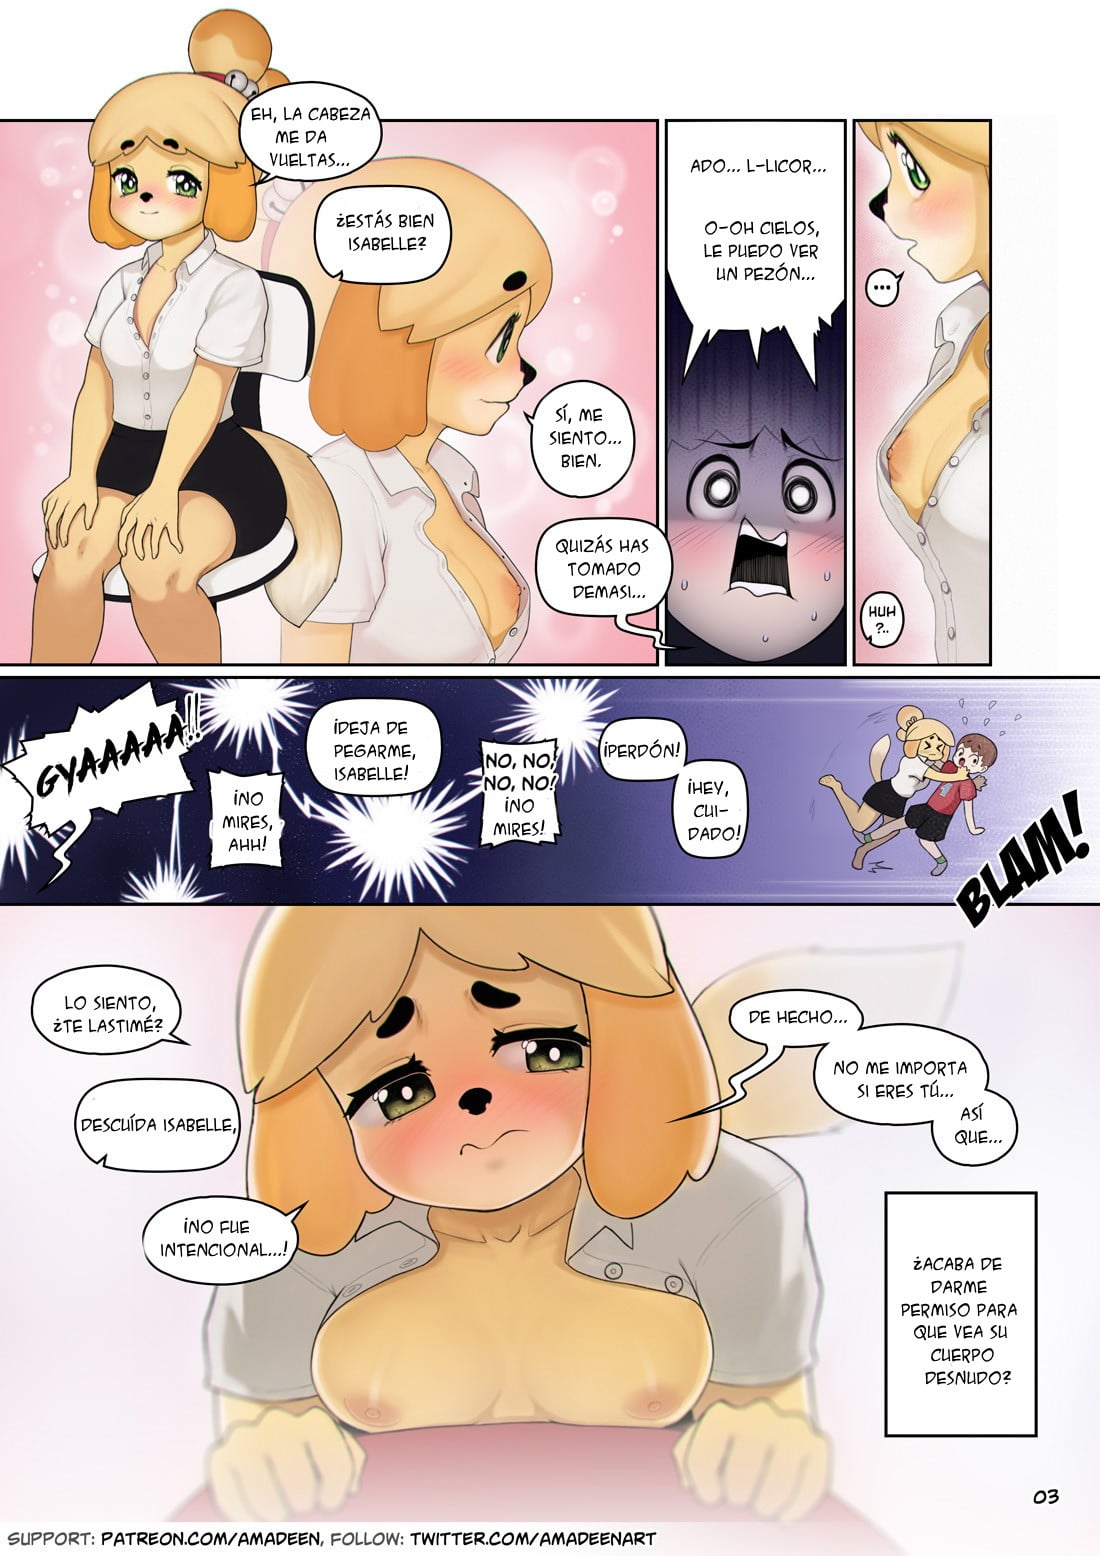 Isabelle’s Lunch Incident - 3